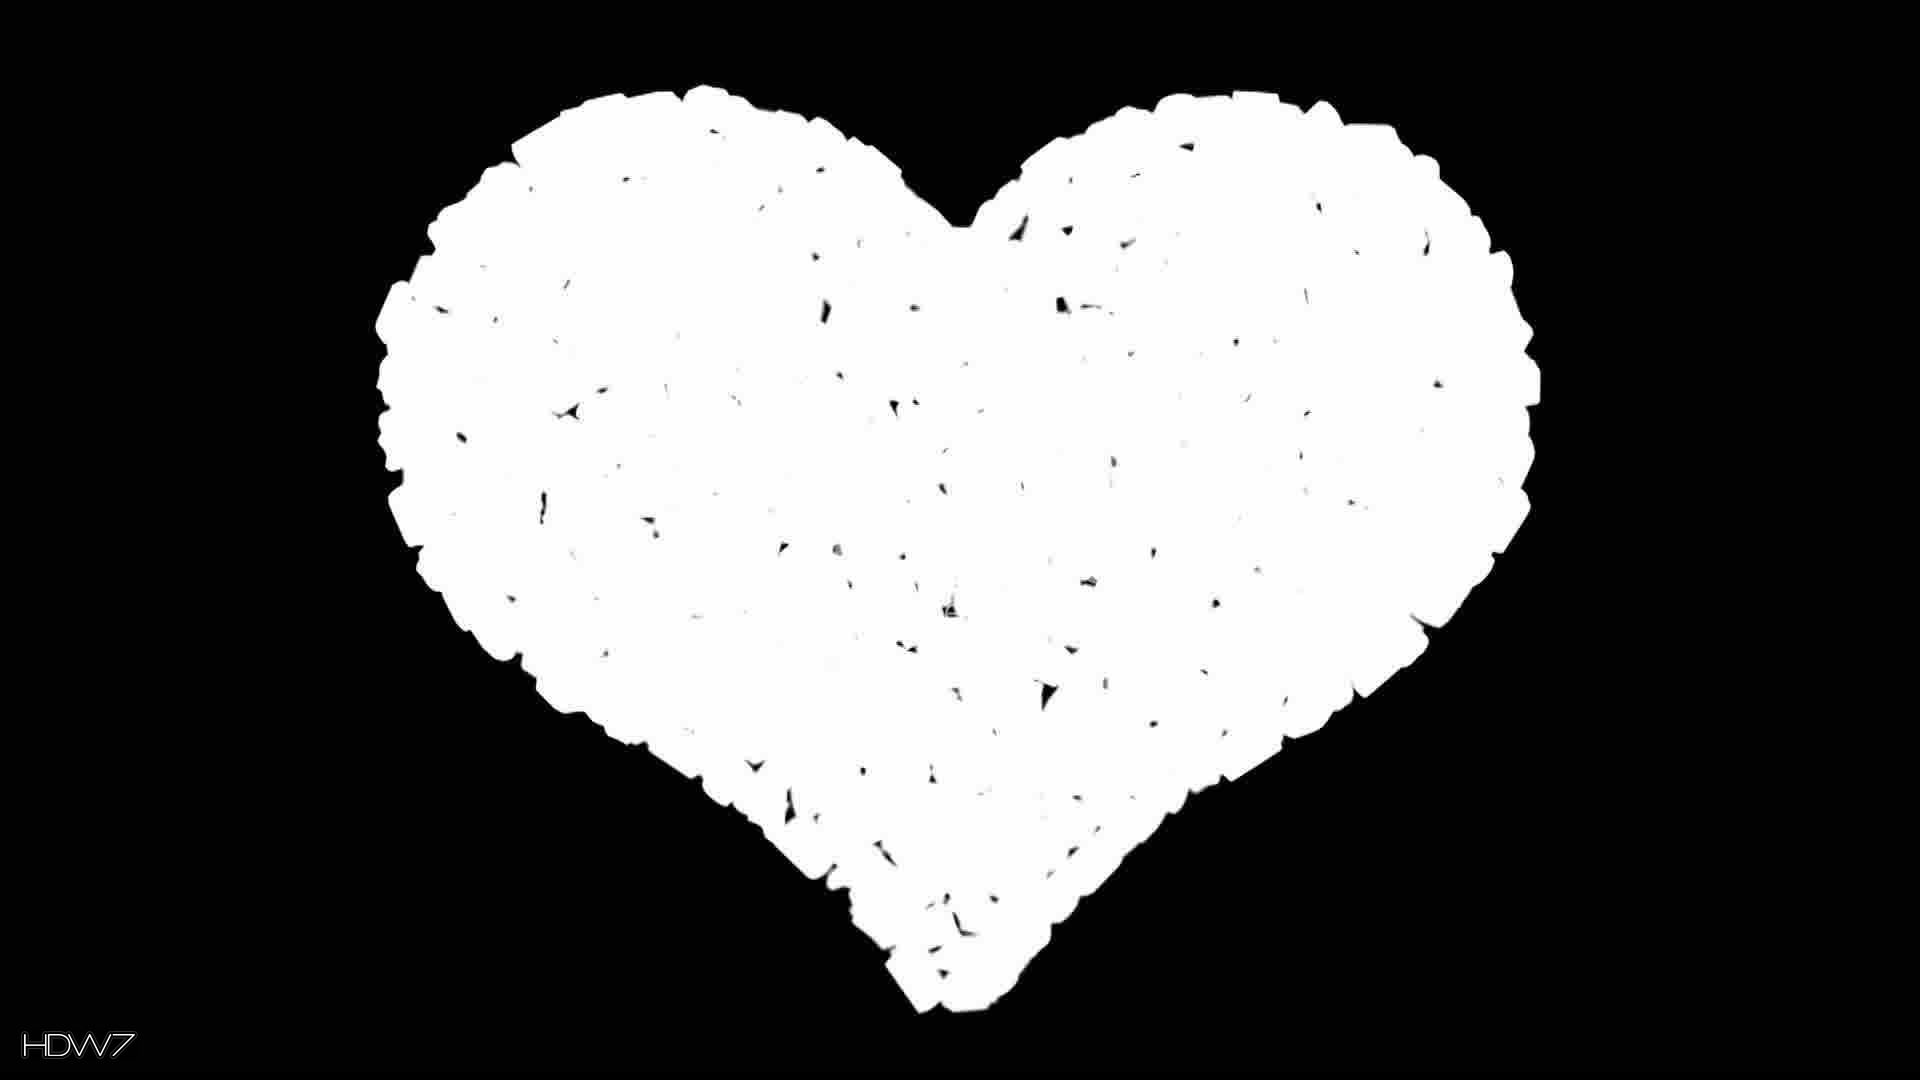 Black And White Candies Heart Shape HD Wallpaper Gallery